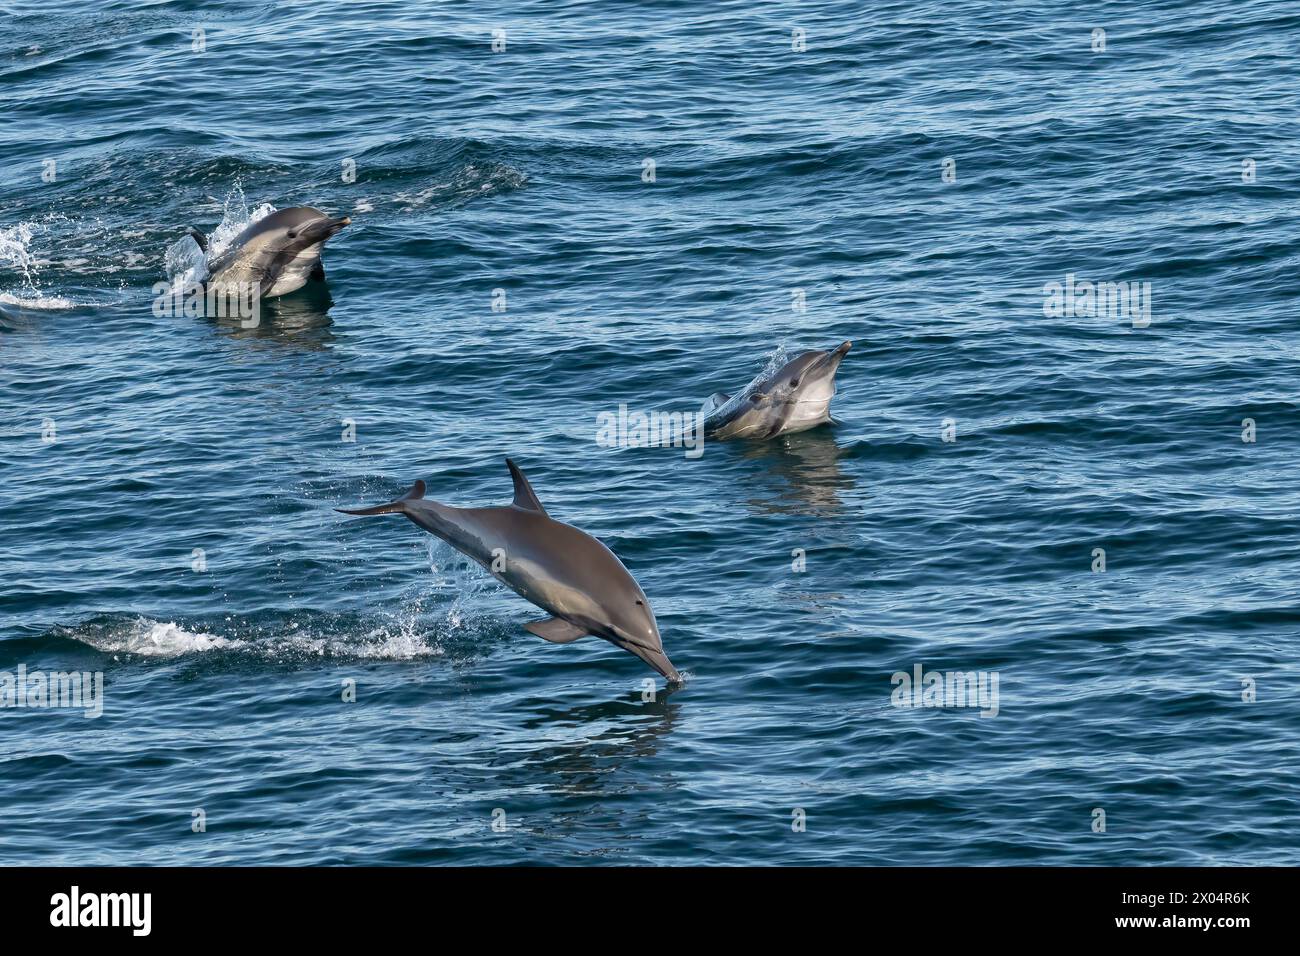 Long-beaked common dolphins (Delphinus capensis) off the coast of Baja California Sur in the Sea of Cortez, Mexico. Stock Photo